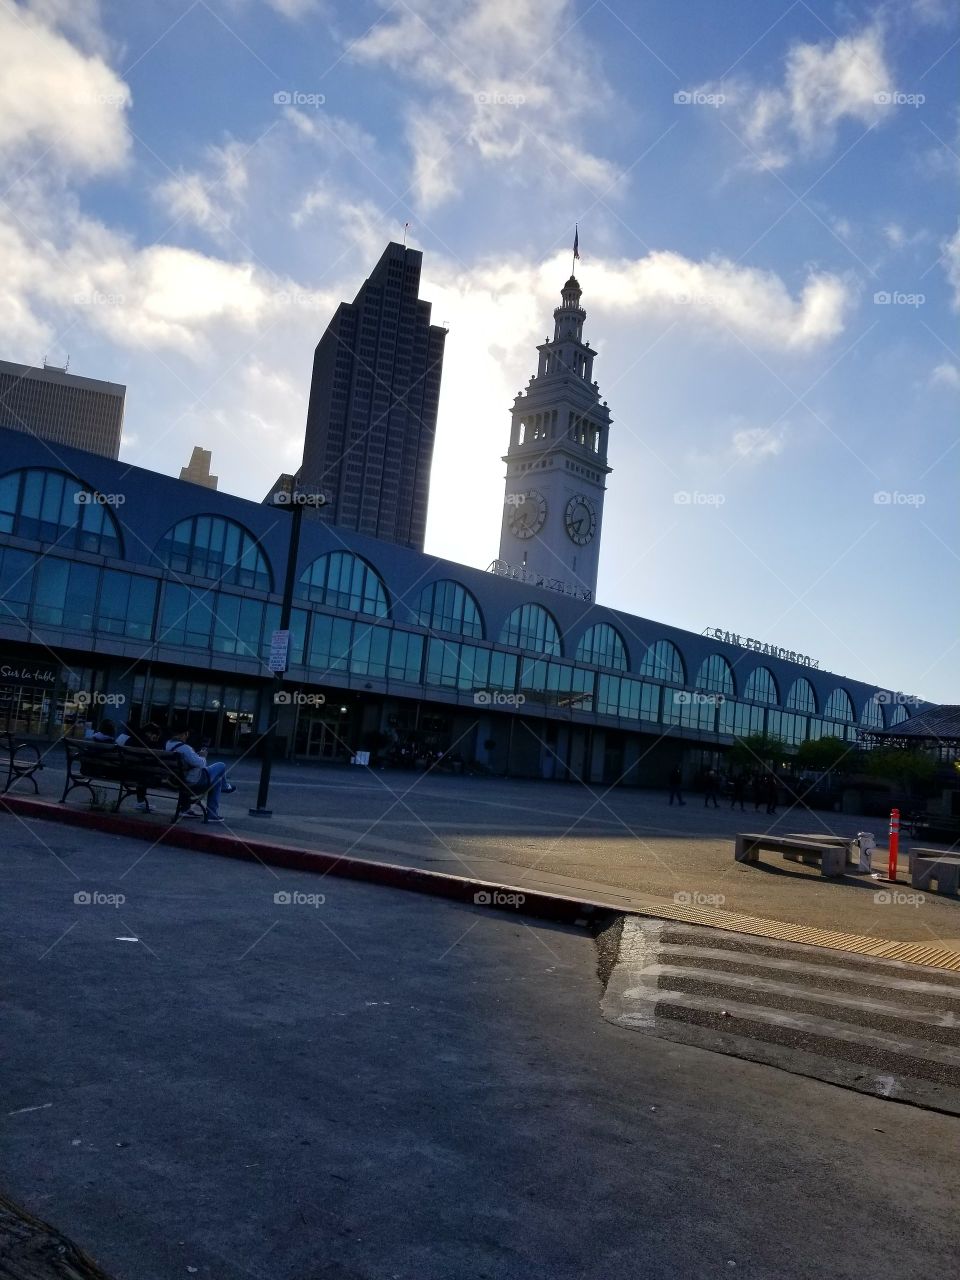 San Francisco in August